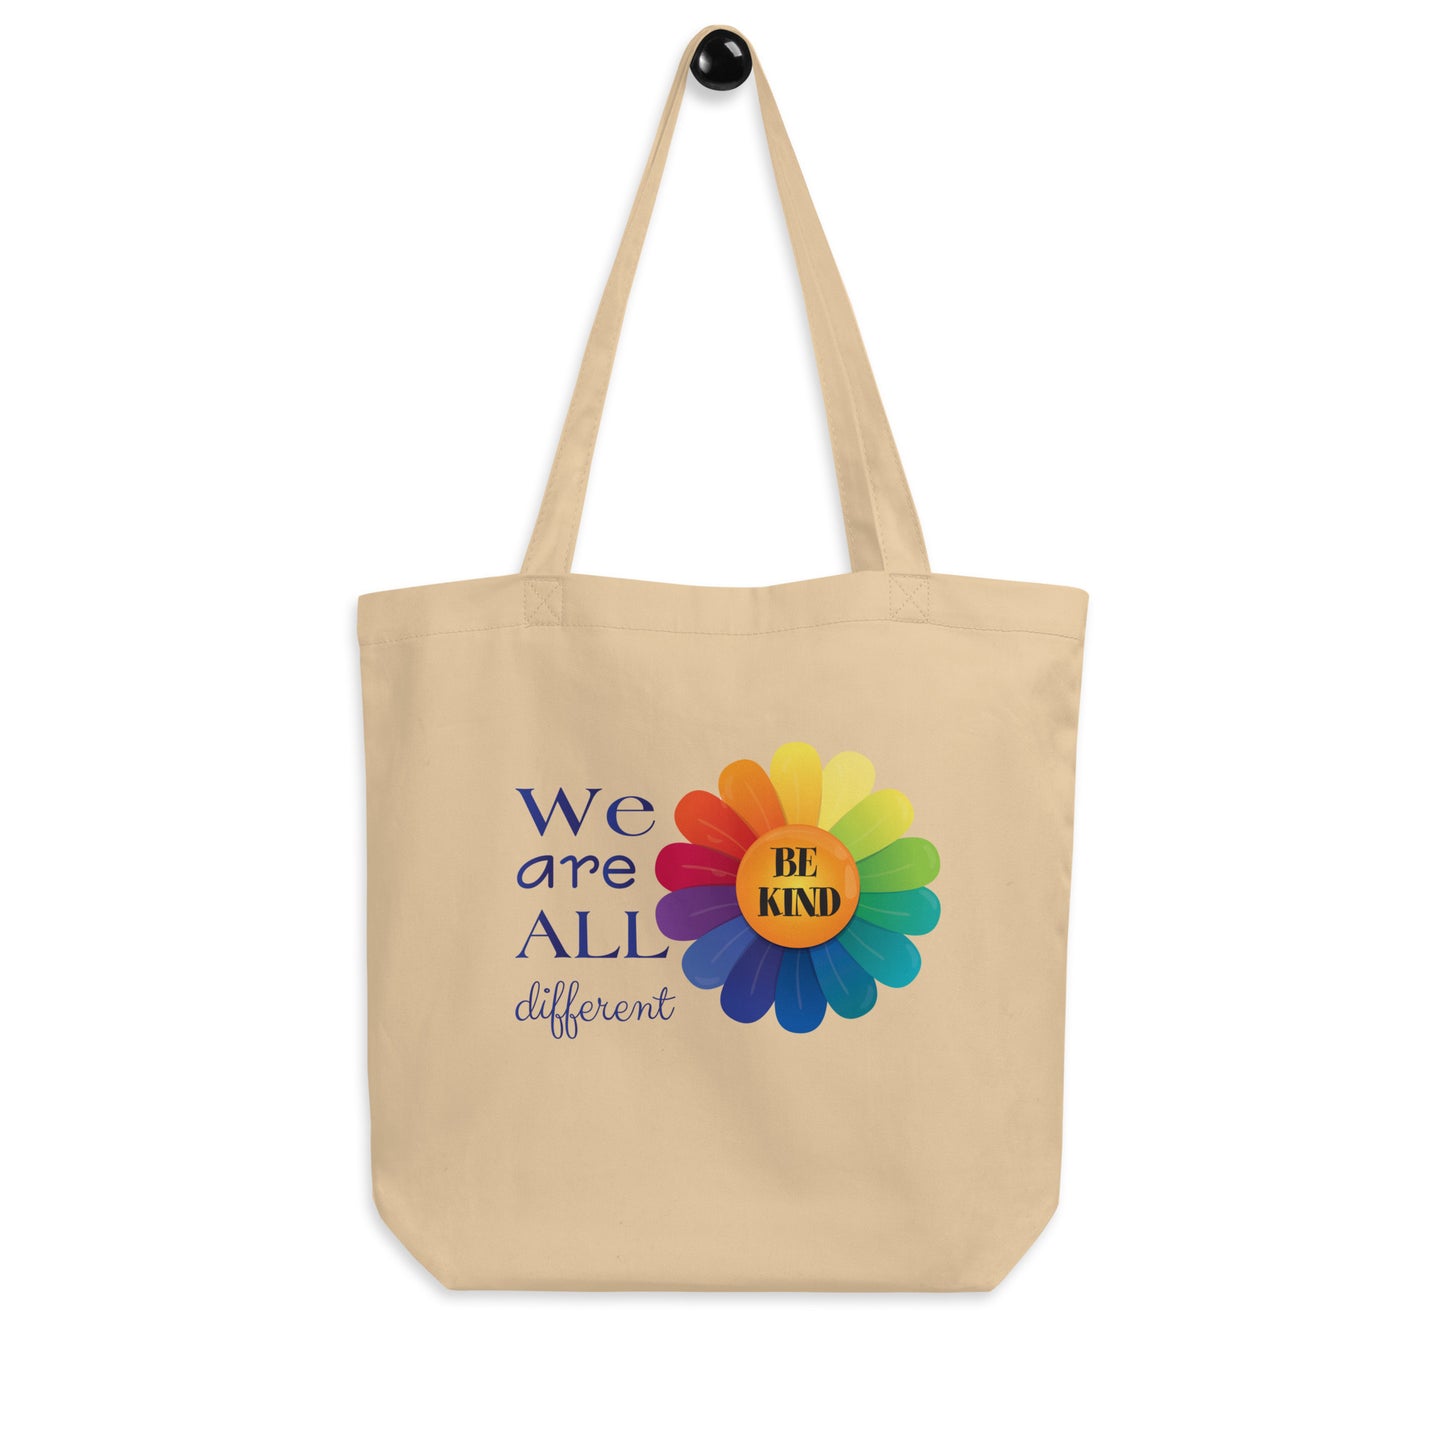 We are all Different P502 Eco Tote Bag